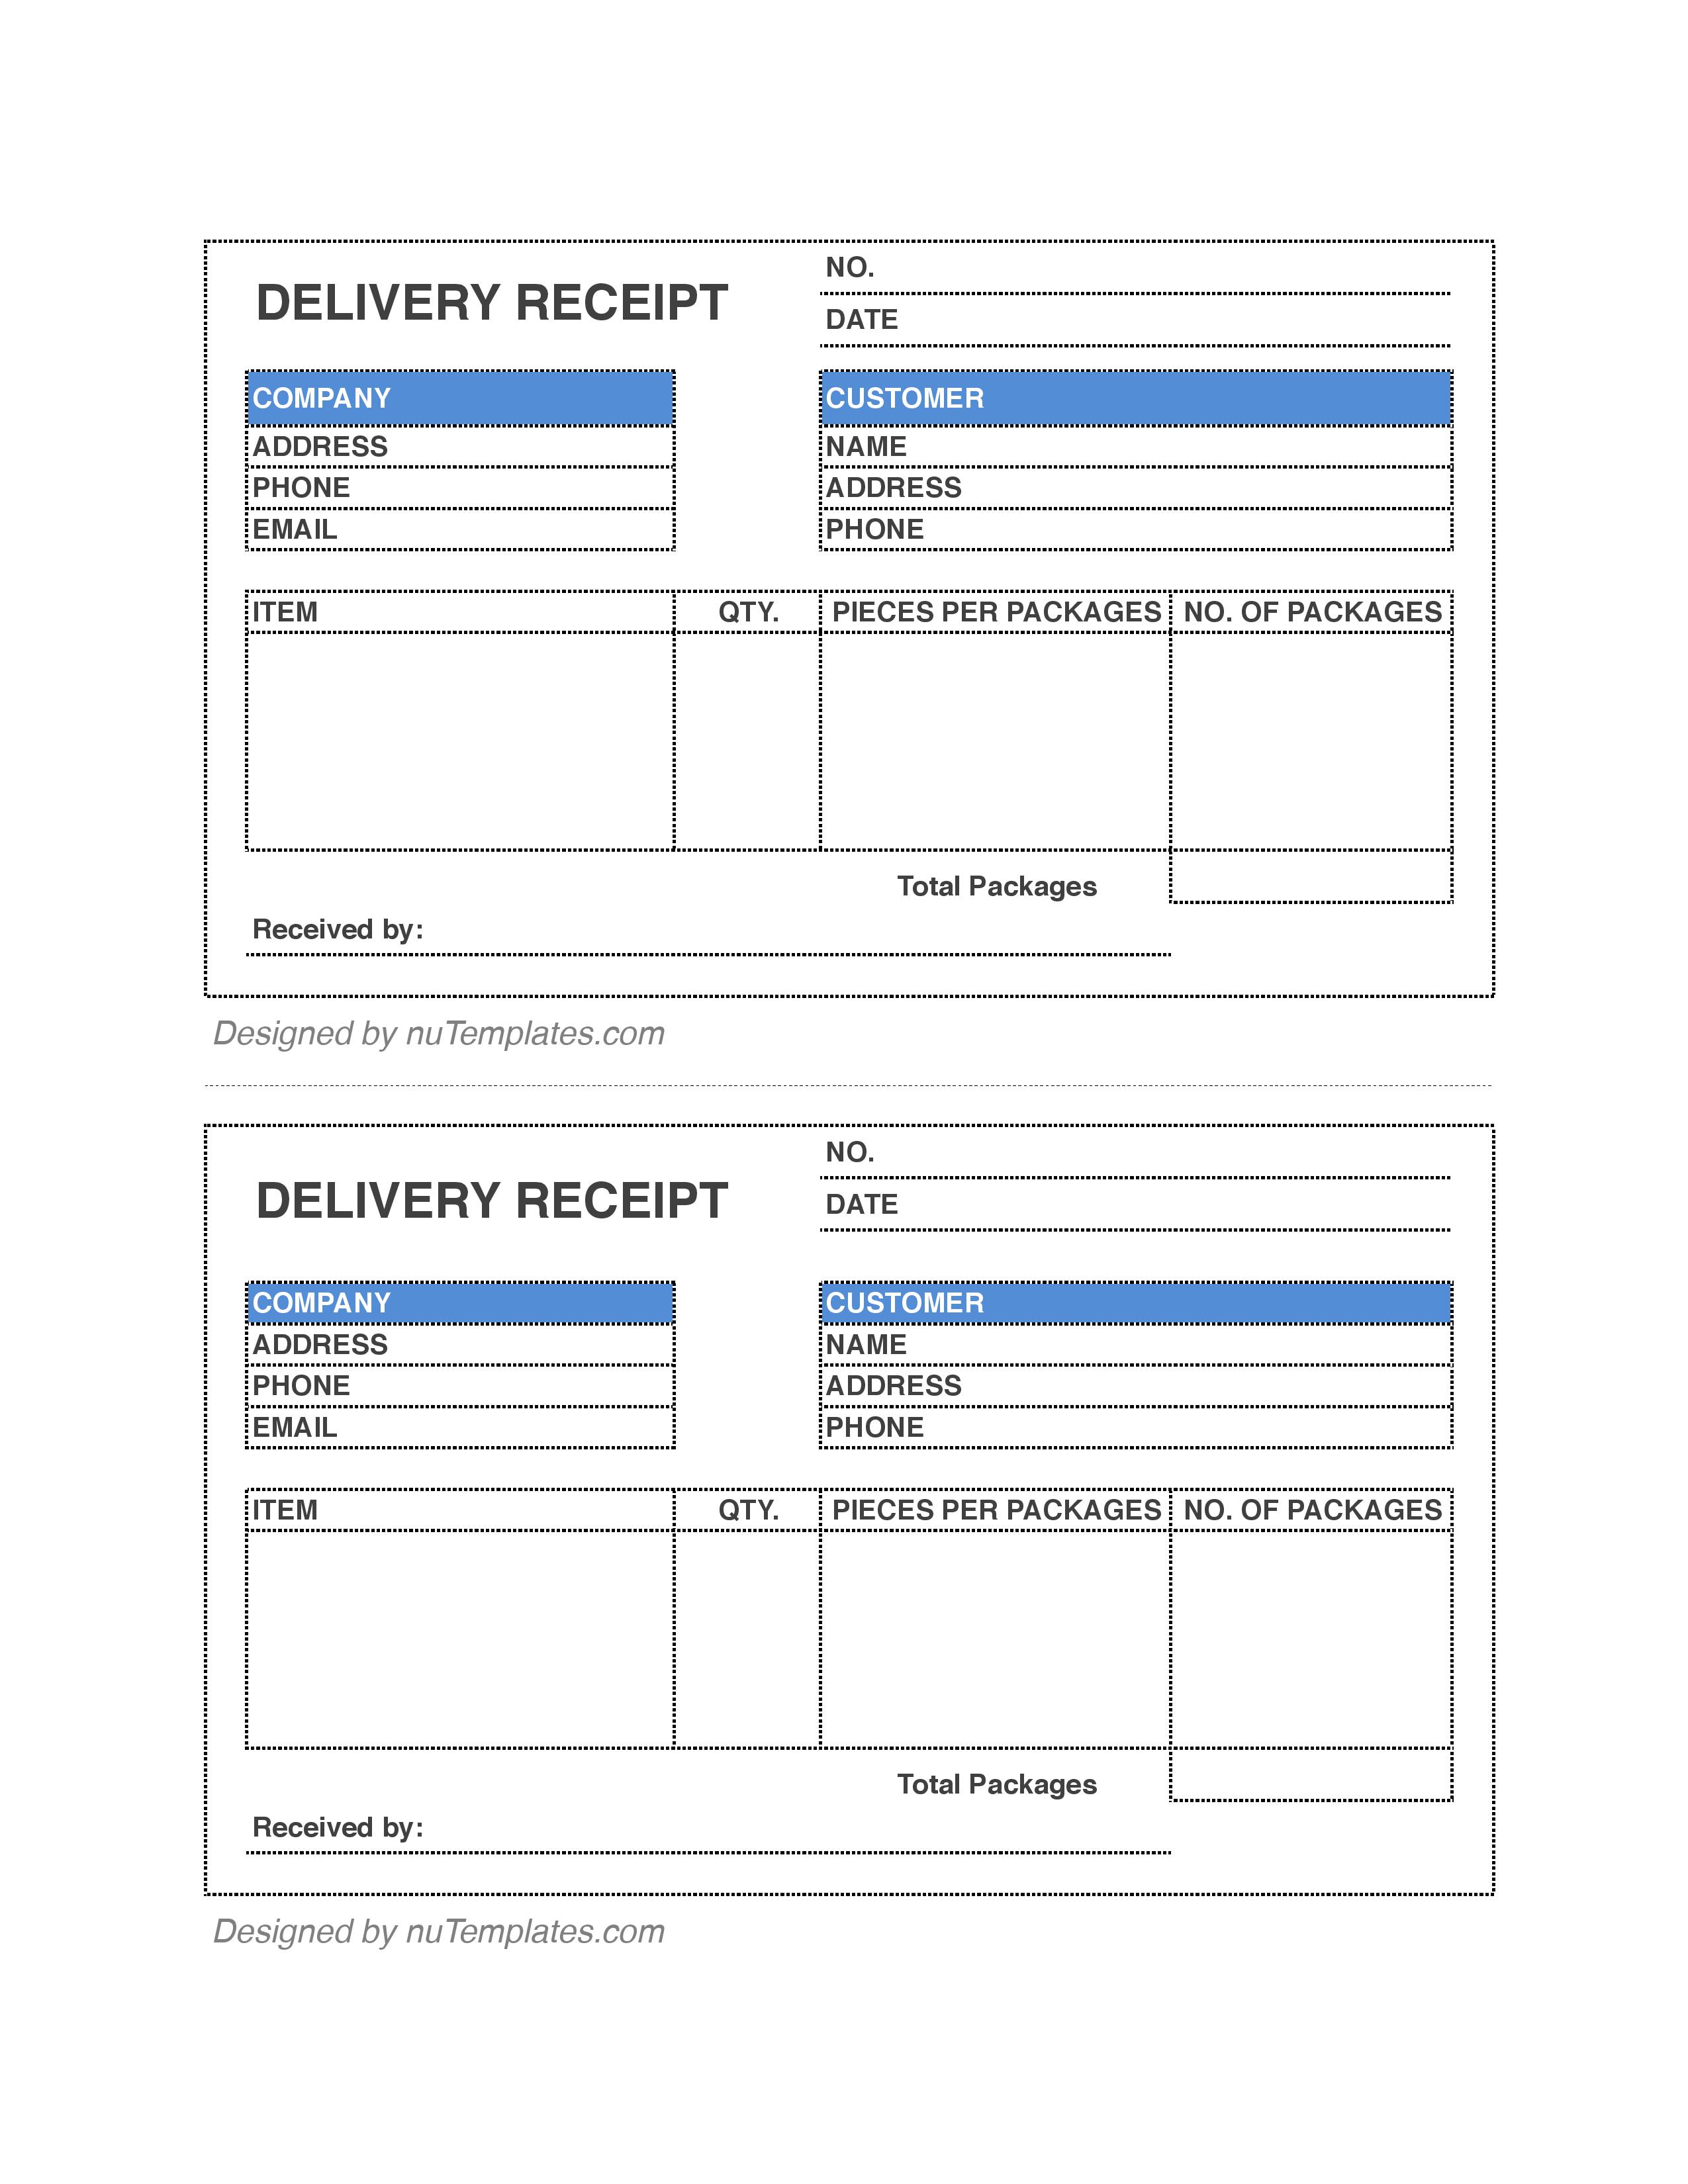 delivery-receipt-template-delivery-receipts-nutemplates